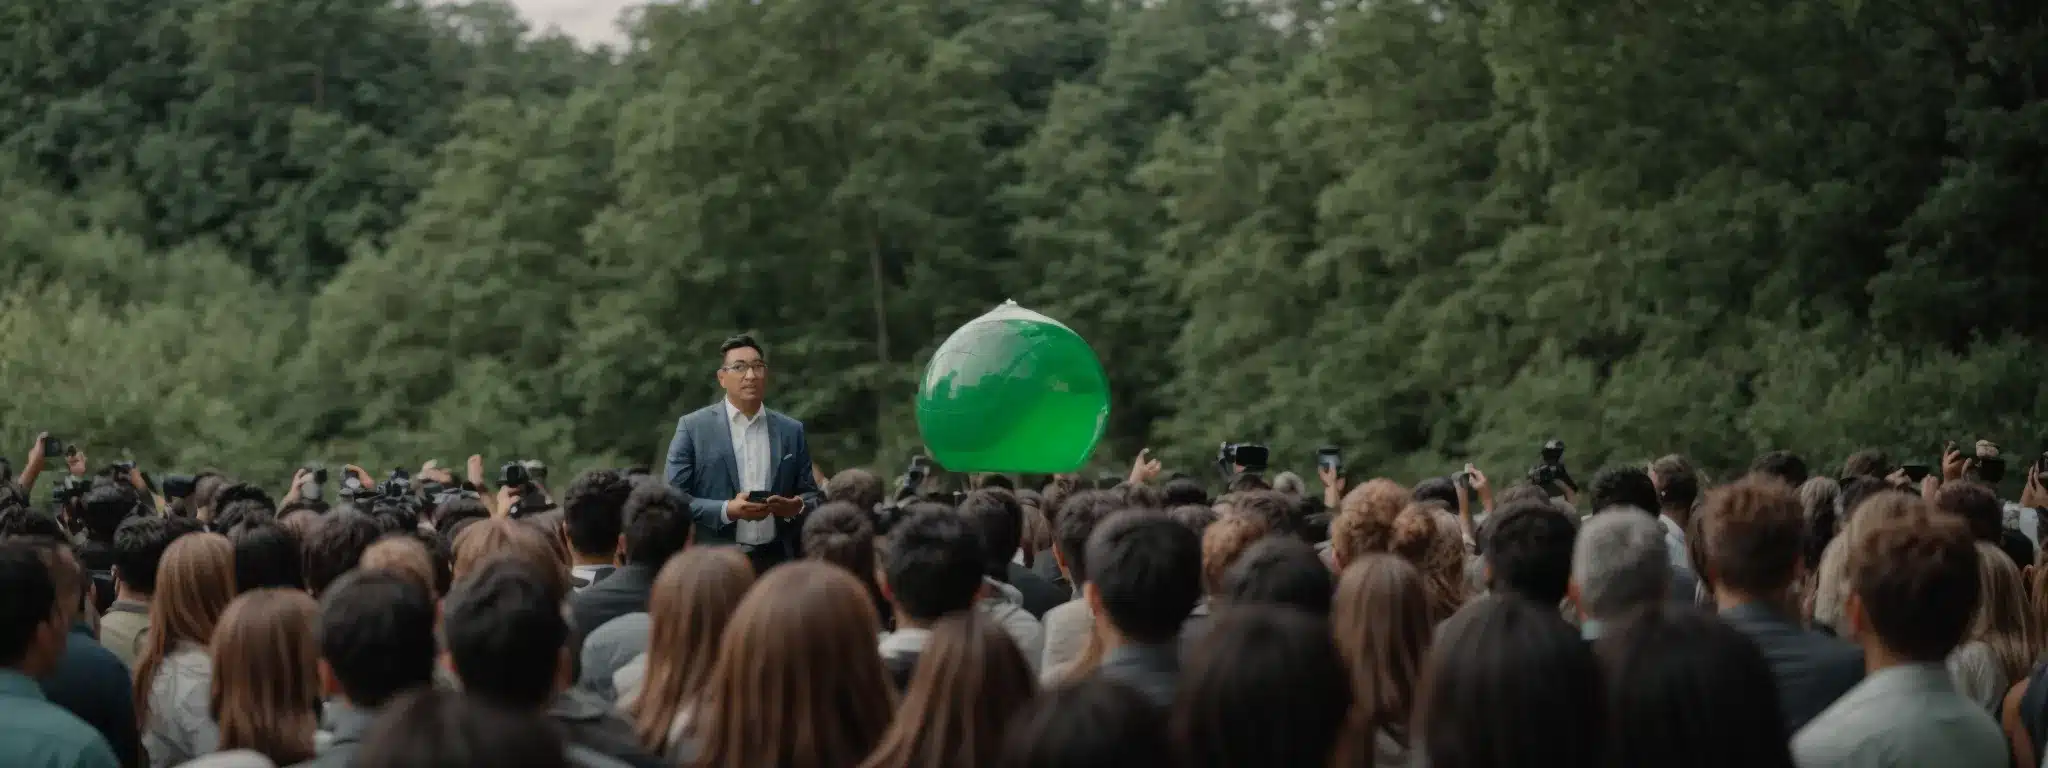 A Visionary Entrepreneur Unveils A Green Product To A Crowd, Symbolizing Environmental Responsibility And Brand Differentiation.